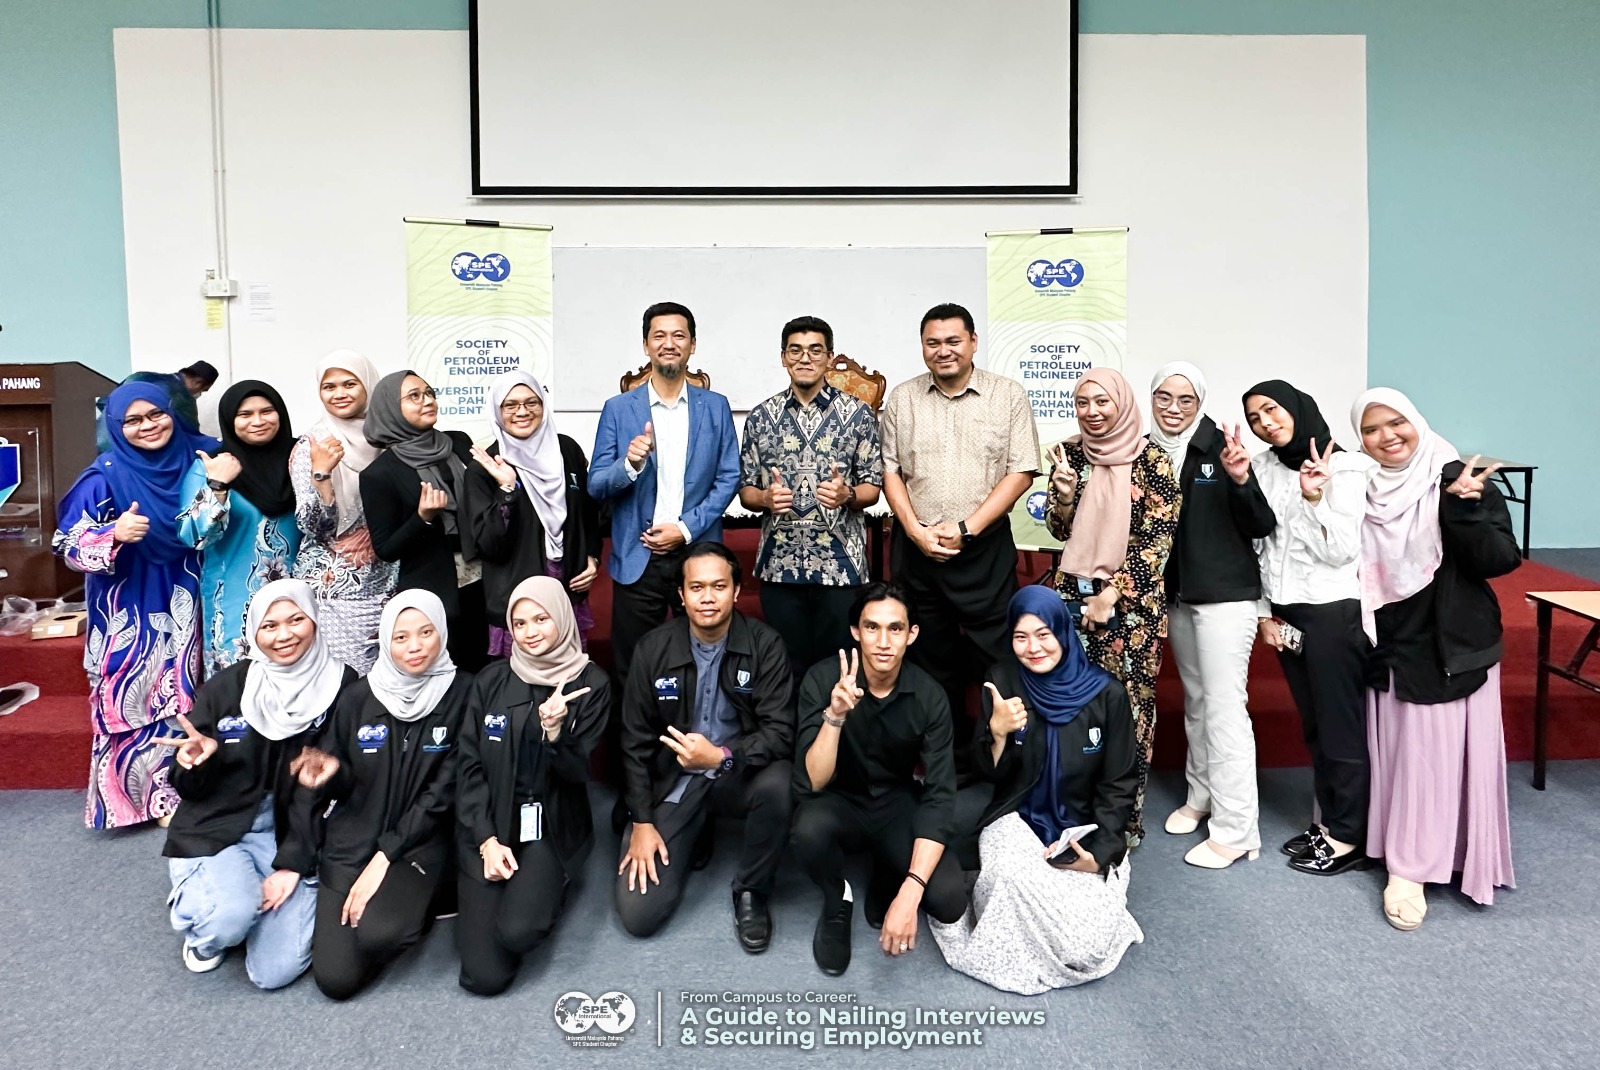 Program Forum Kerjaya - “From Campus to Career: A Guide to Nailing Interviews and Securing Employment”